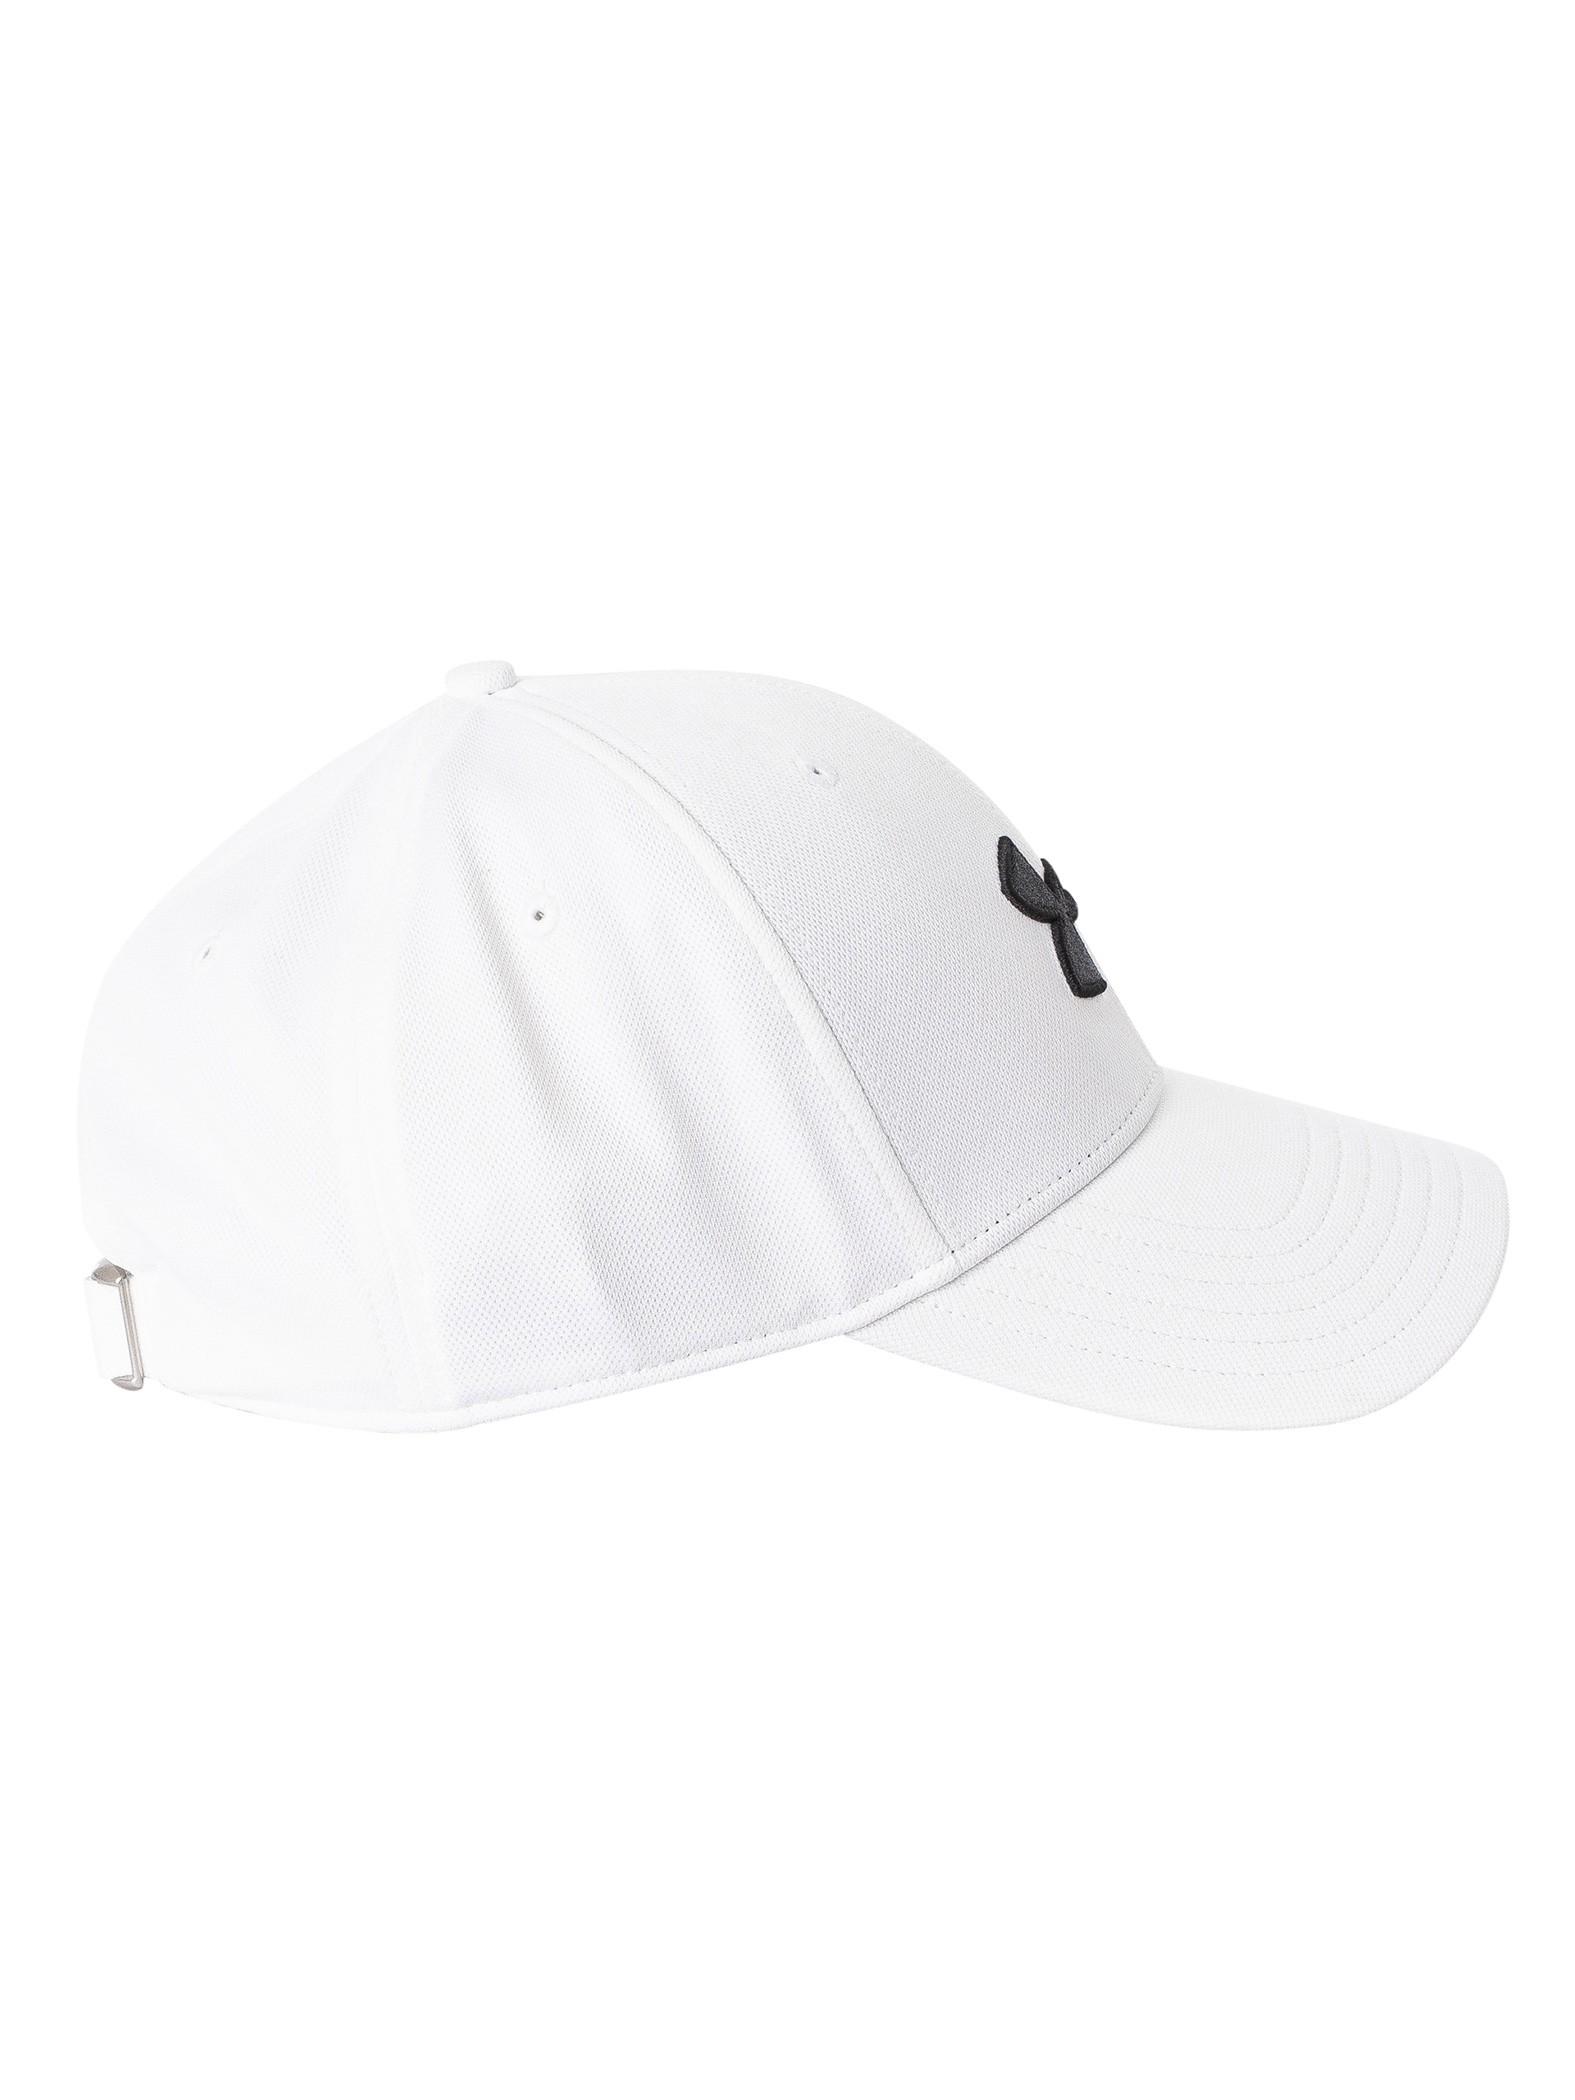 Under Armour Blitzing Adjustable Cap in White for Men